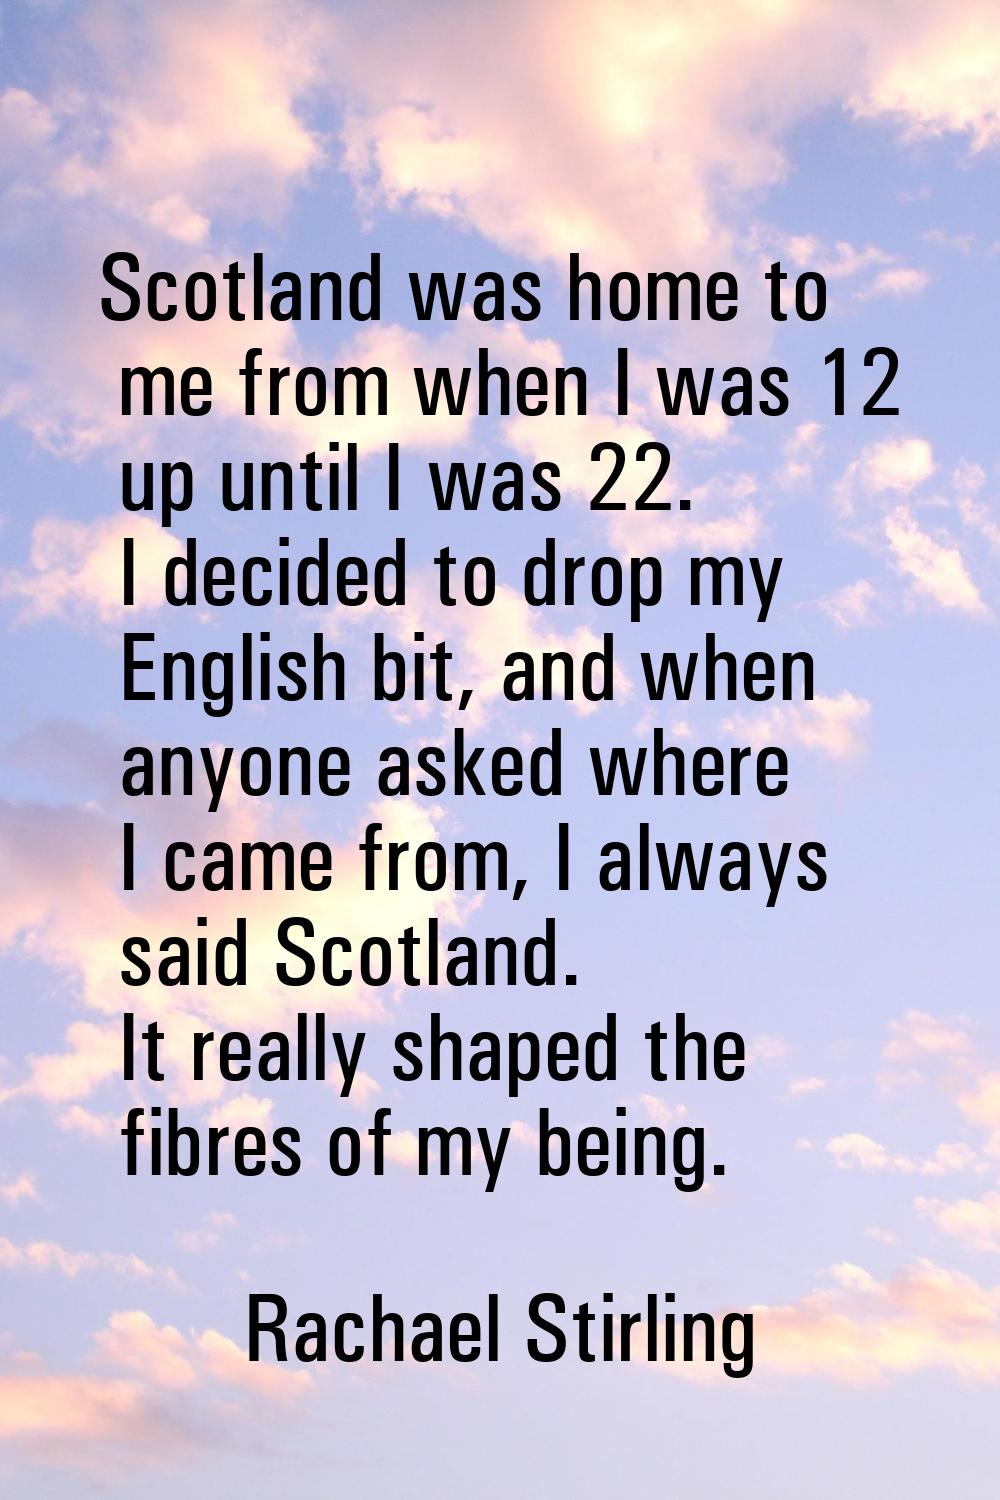 Scotland was home to me from when I was 12 up until I was 22. I decided to drop my English bit, and